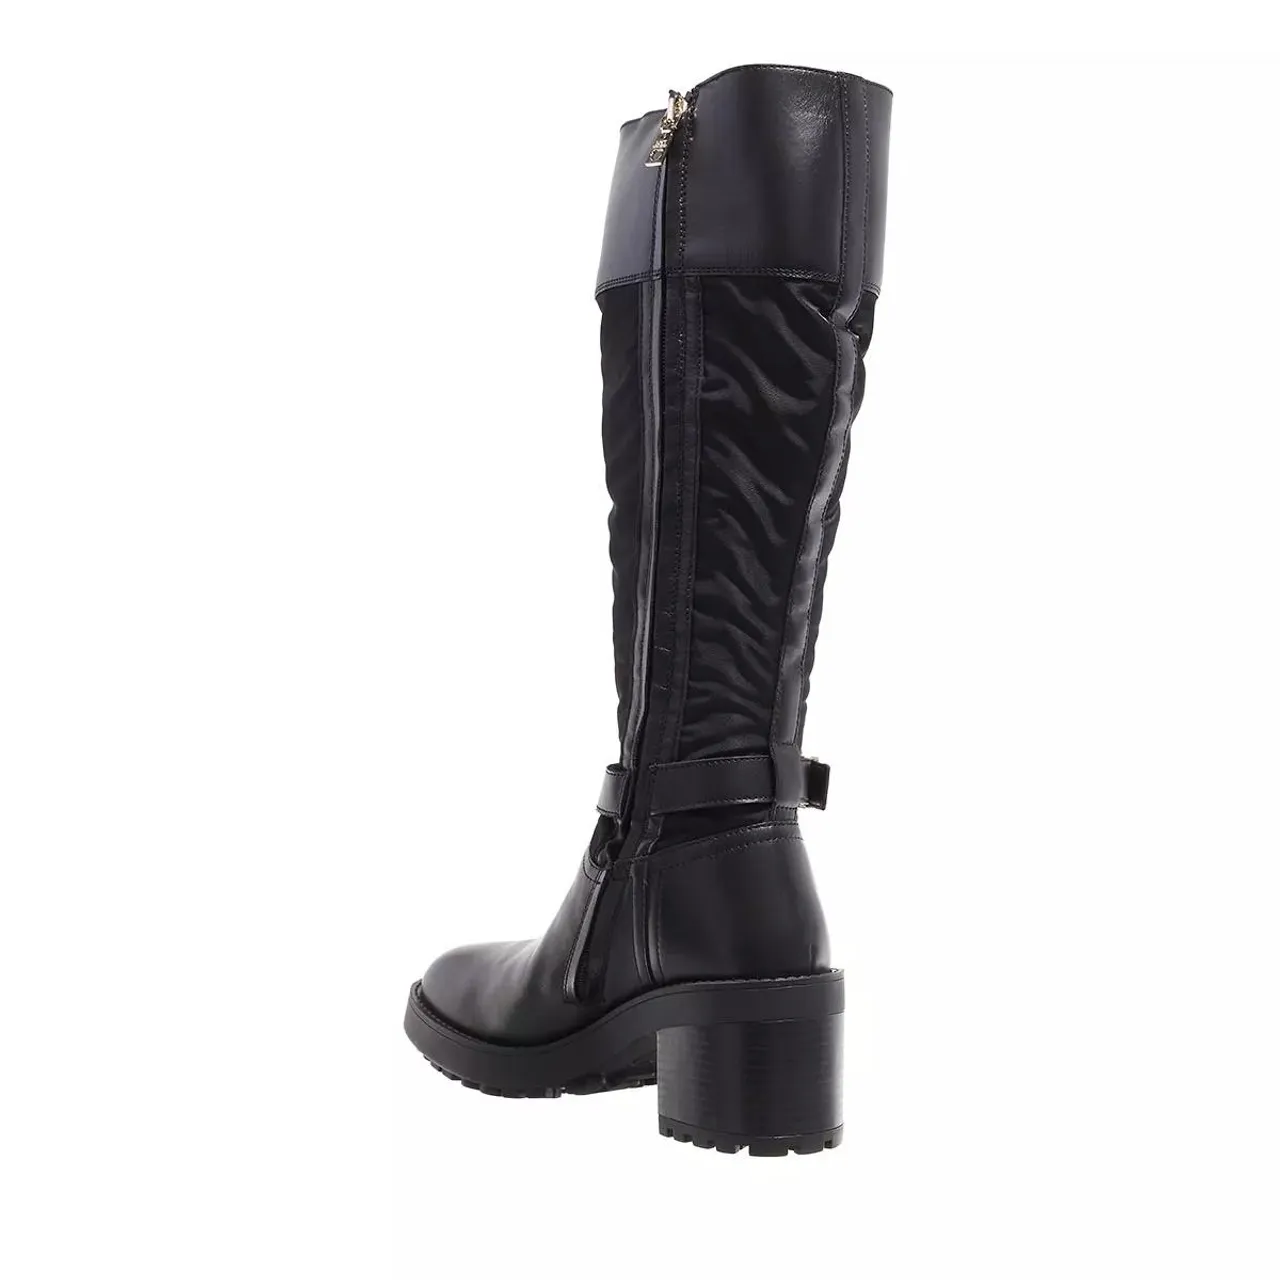 Love Moschino Boots & Ankle Boots - Stivaled.Quad70 Vitello+Nylon - black - Boots & Ankle Boots for ladies